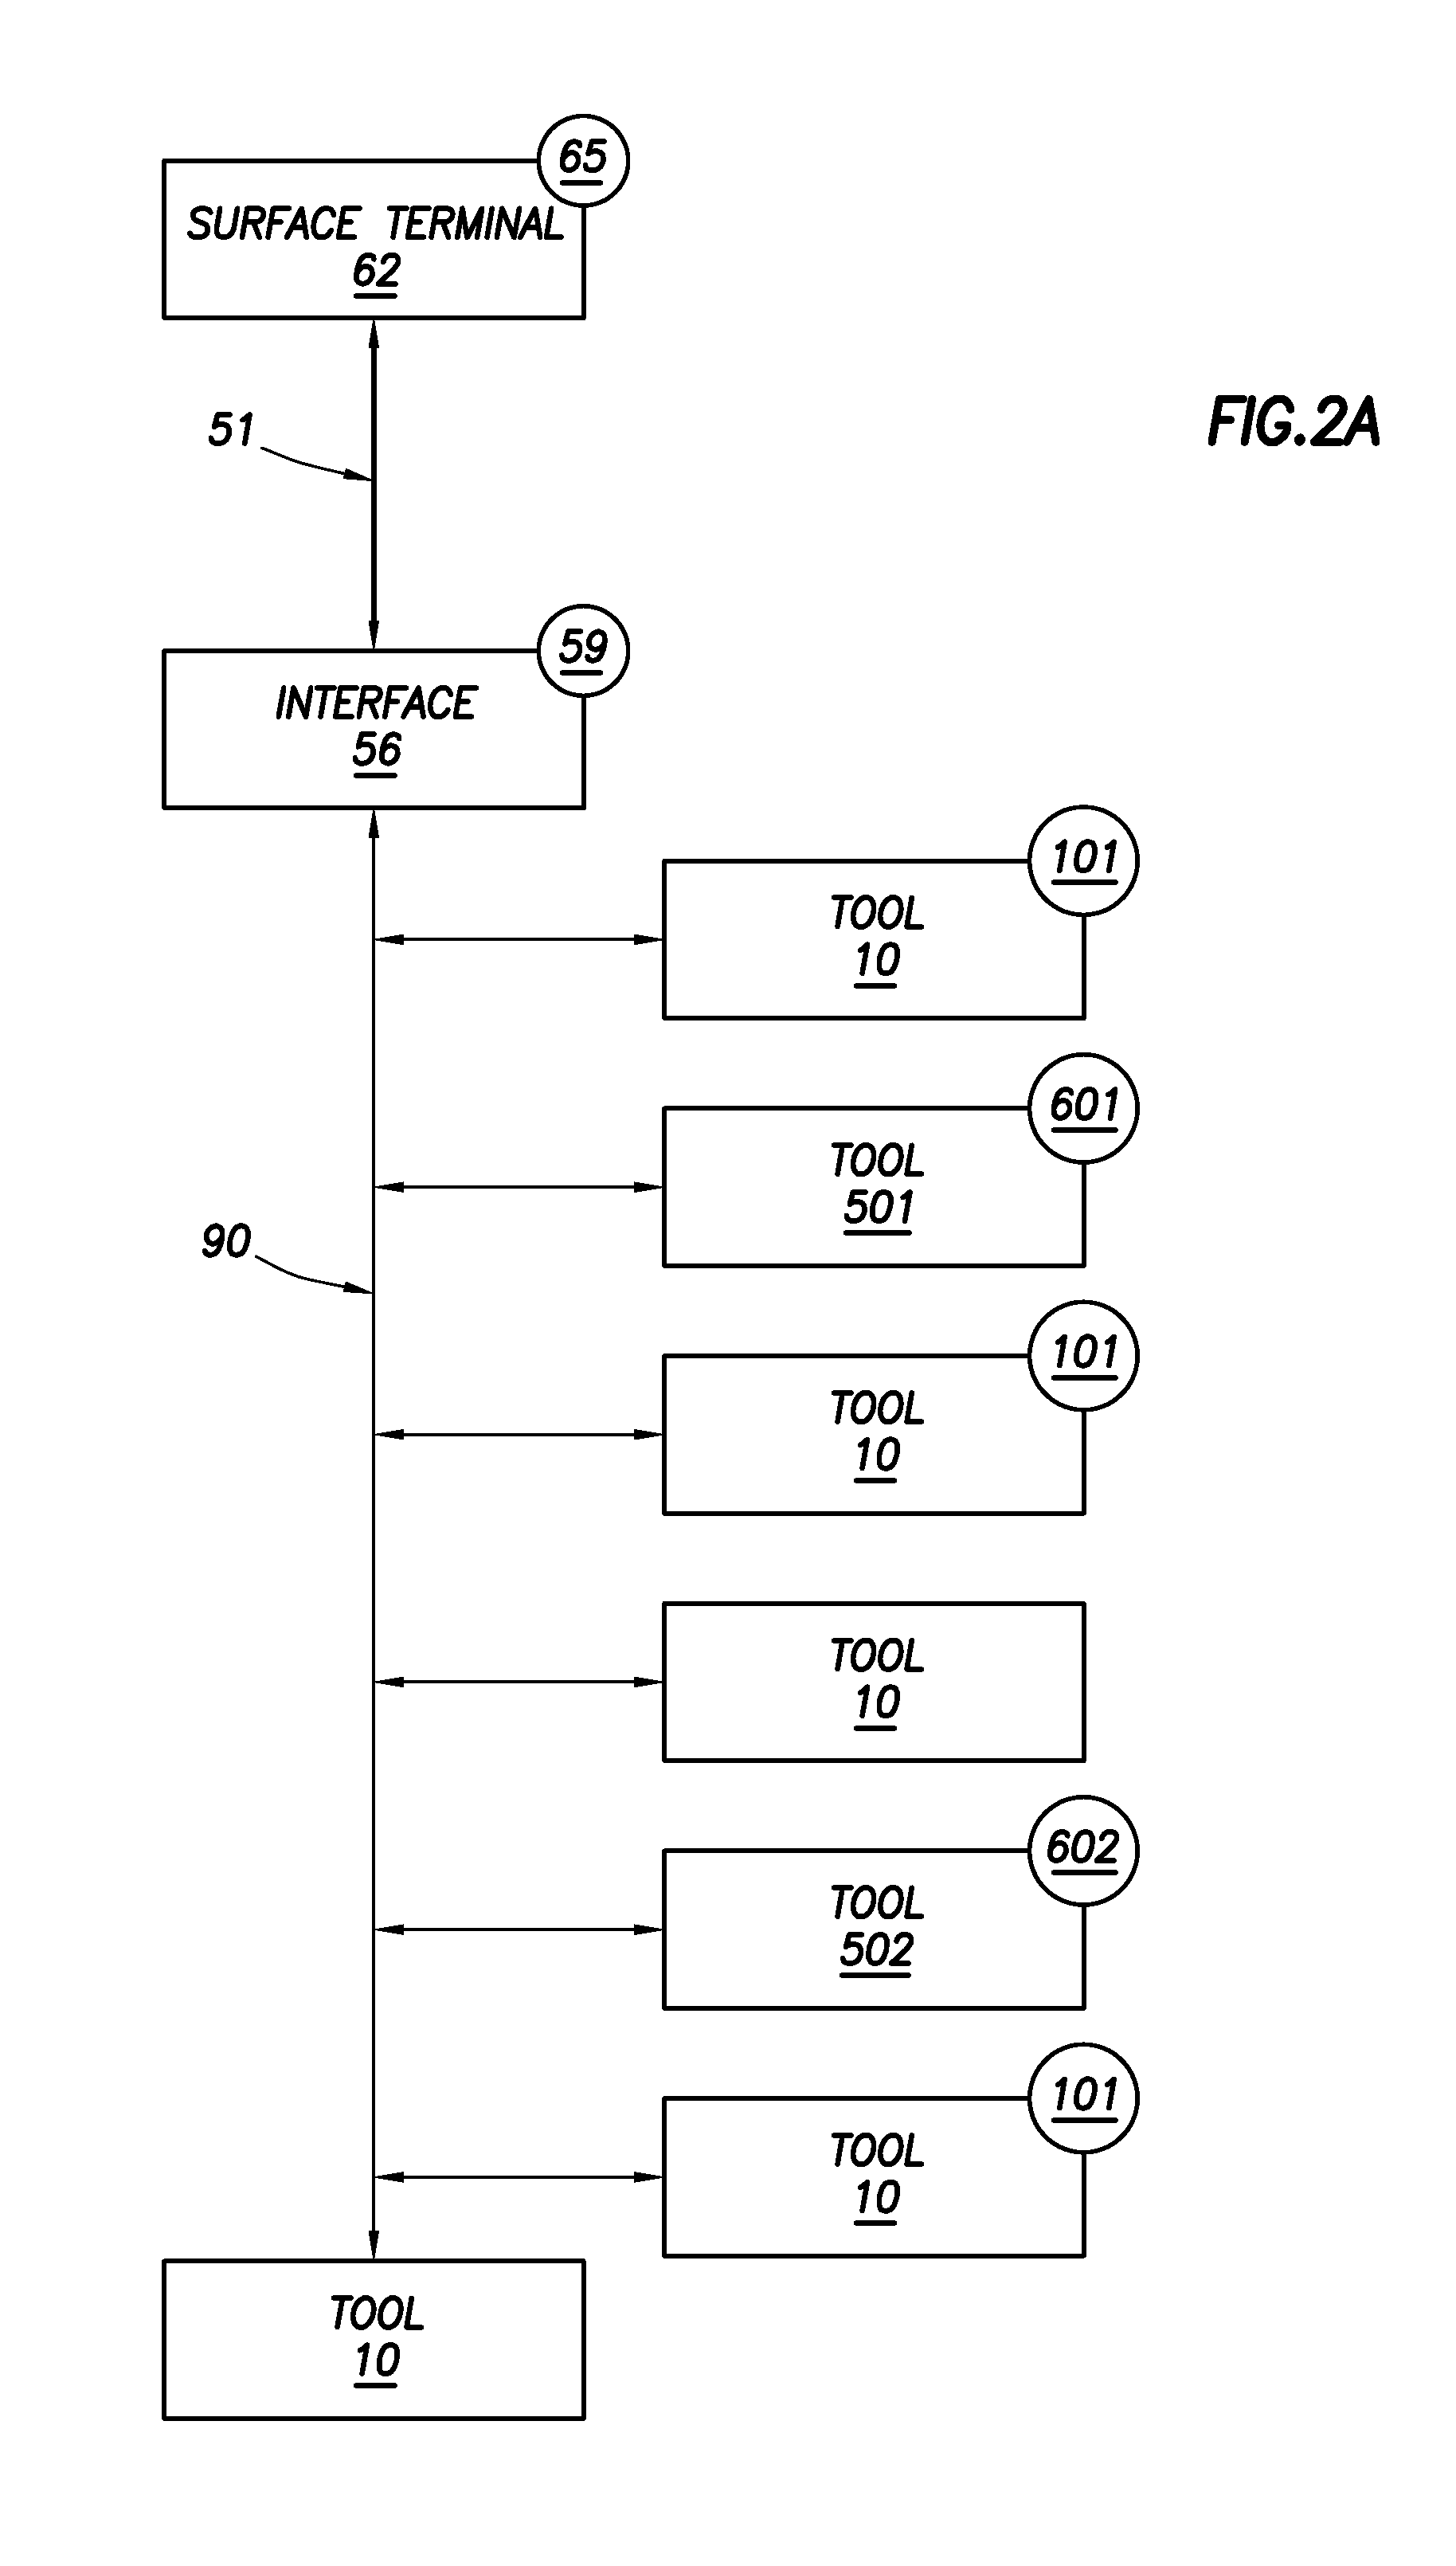 System and Method for Associating Time Stamped Measurement Data with a Corresponding Wellbore Depth